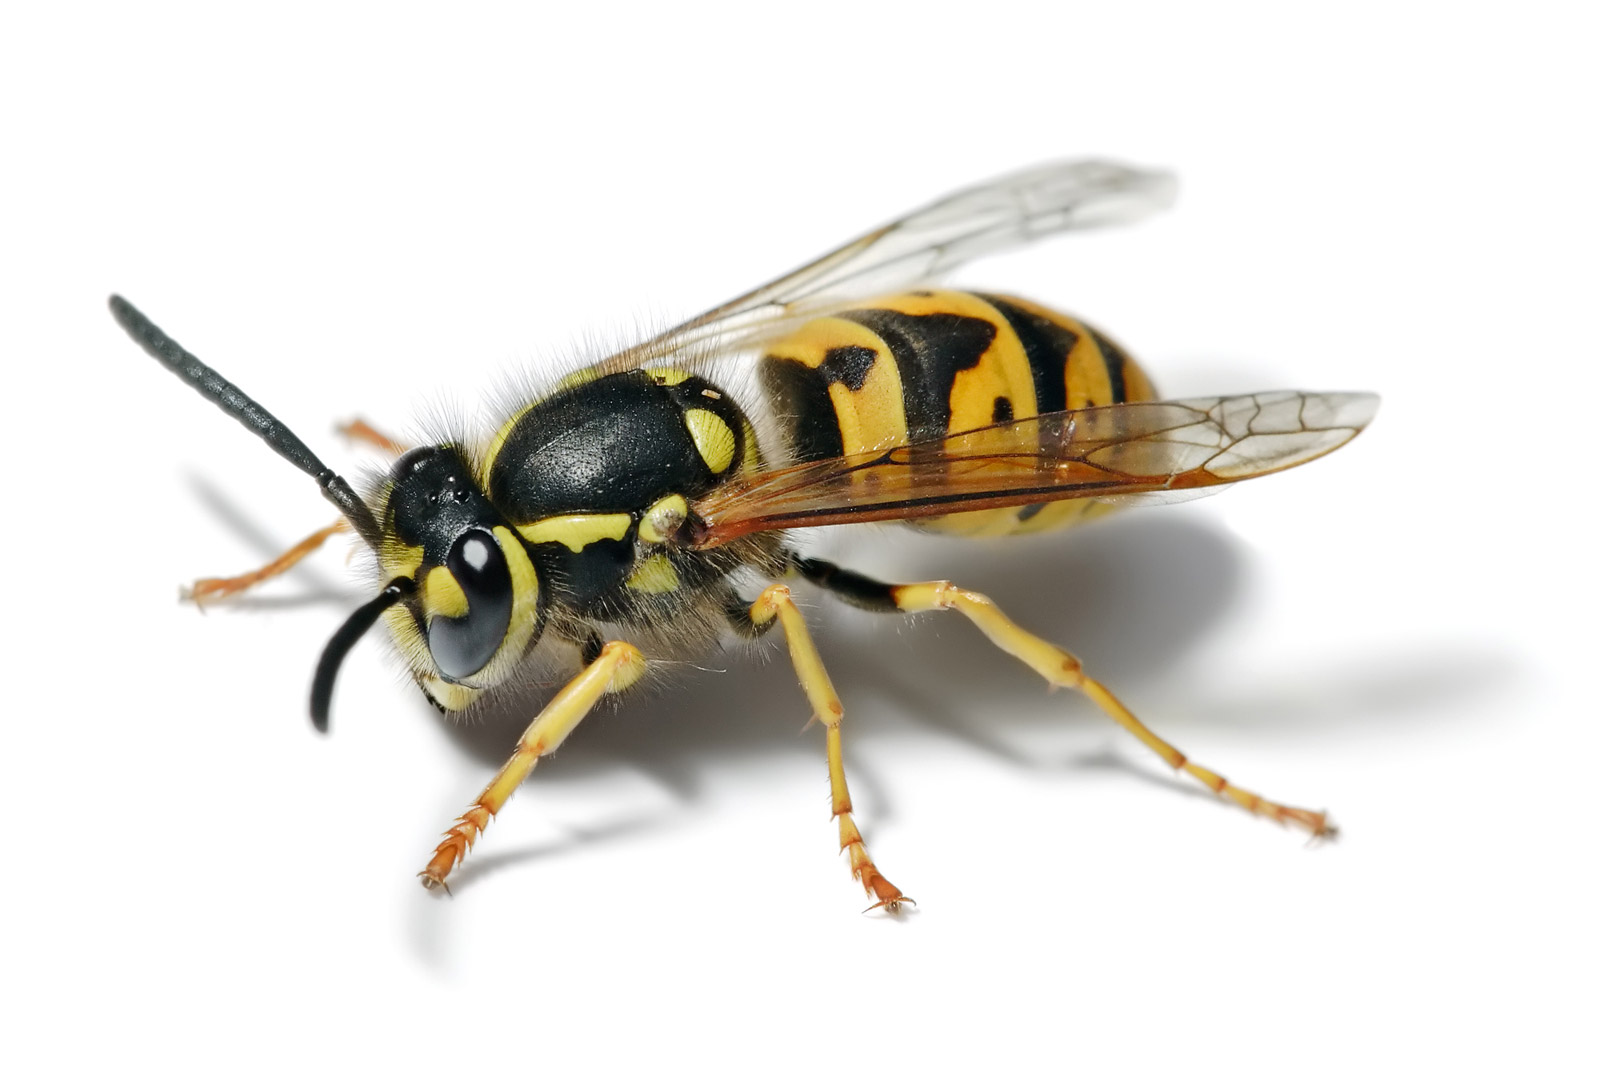 Yellowjacket Backgrounds, Compatible - PC, Mobile, Gadgets| 1600x1066 px